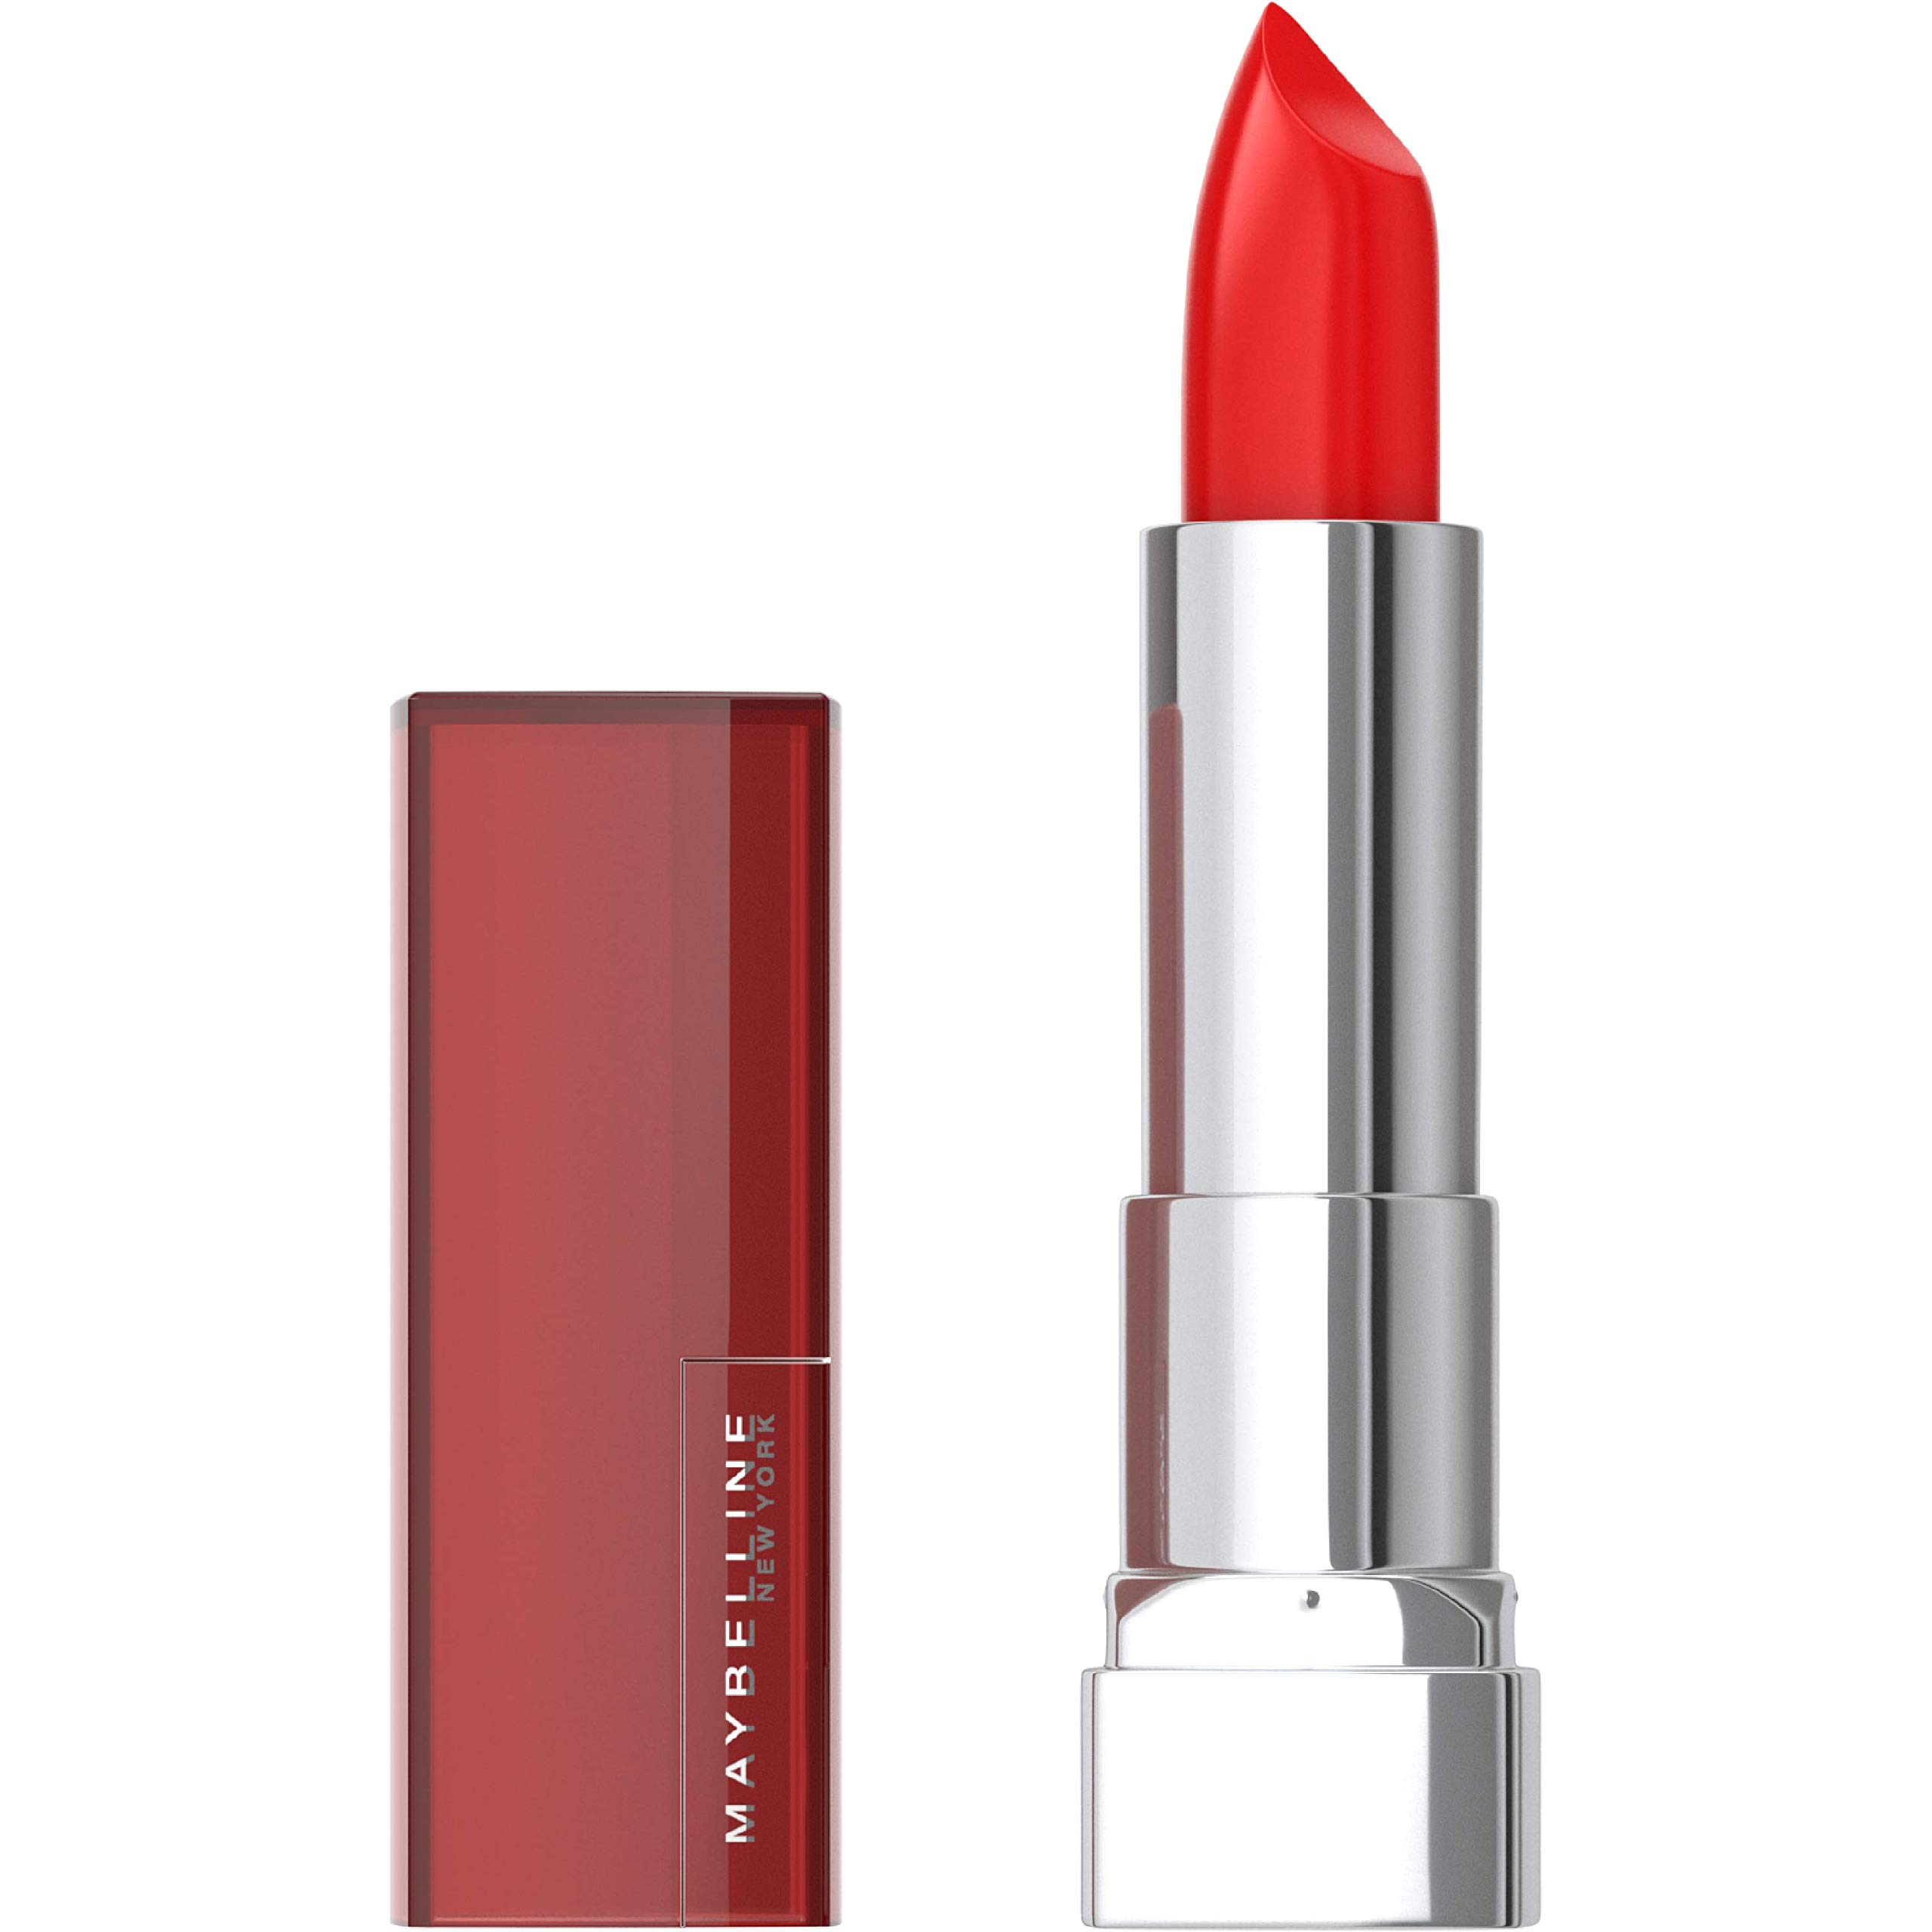 Book Cover Maybelline Color Sensational Lipstick, Lip Makeup, Cream Finish, Hydrating Lipstick, Nude, Pink, Red, Plum Lip Color, On Fire Red, 0.15 oz; (Packaging May Vary) 895 ON FIRE RED 1 Count (Pack of 1)